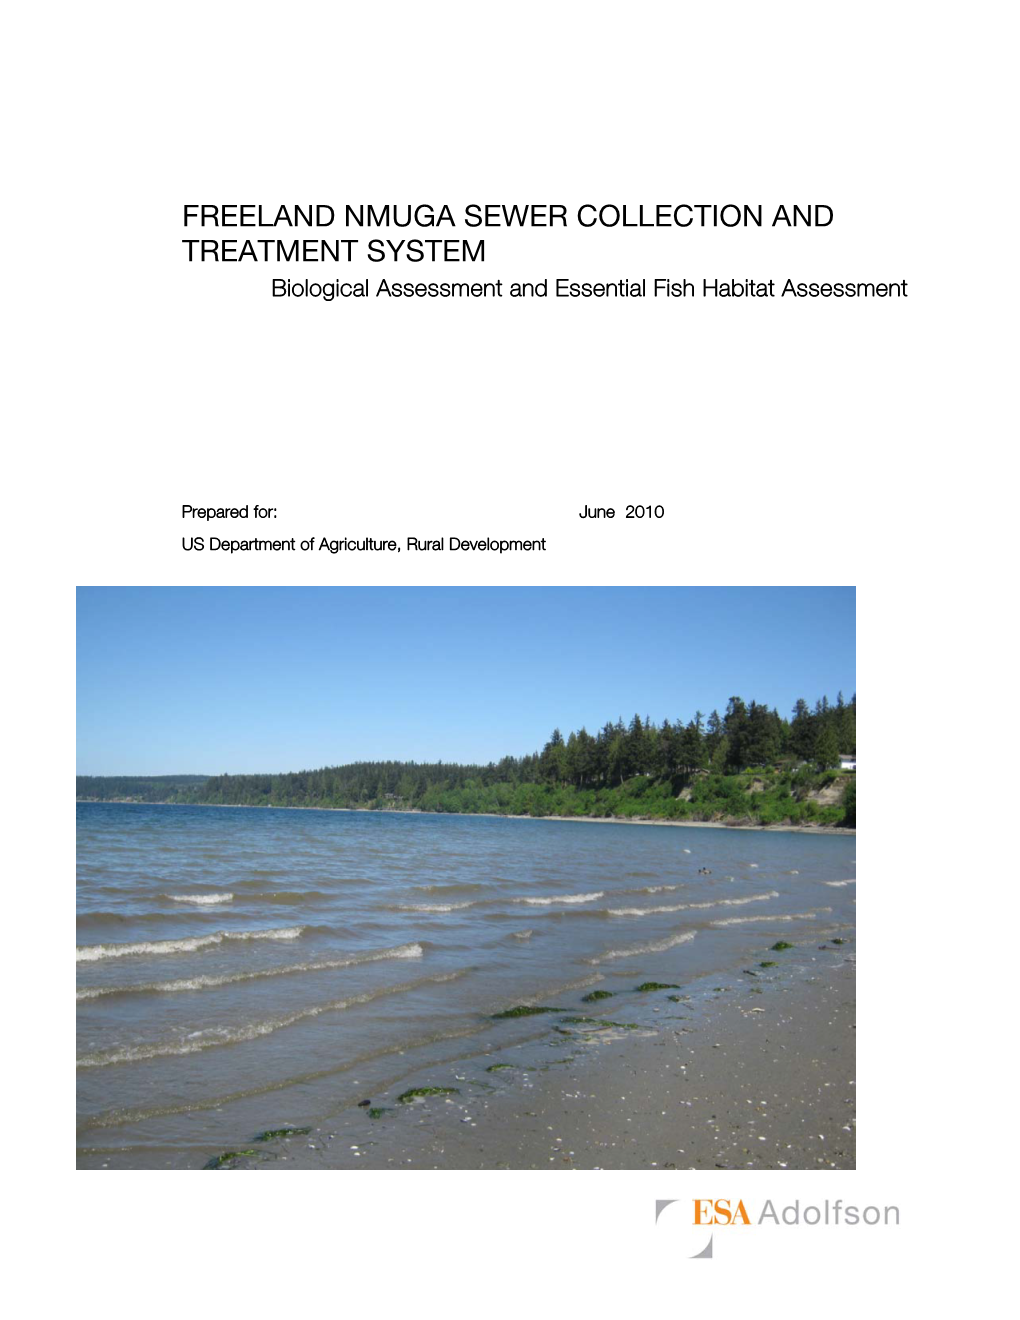 FREELAND NMUGA SEWER COLLECTION and TREATMENT SYSTEM Biological Assessment and Essential Fish Habitat Assessment